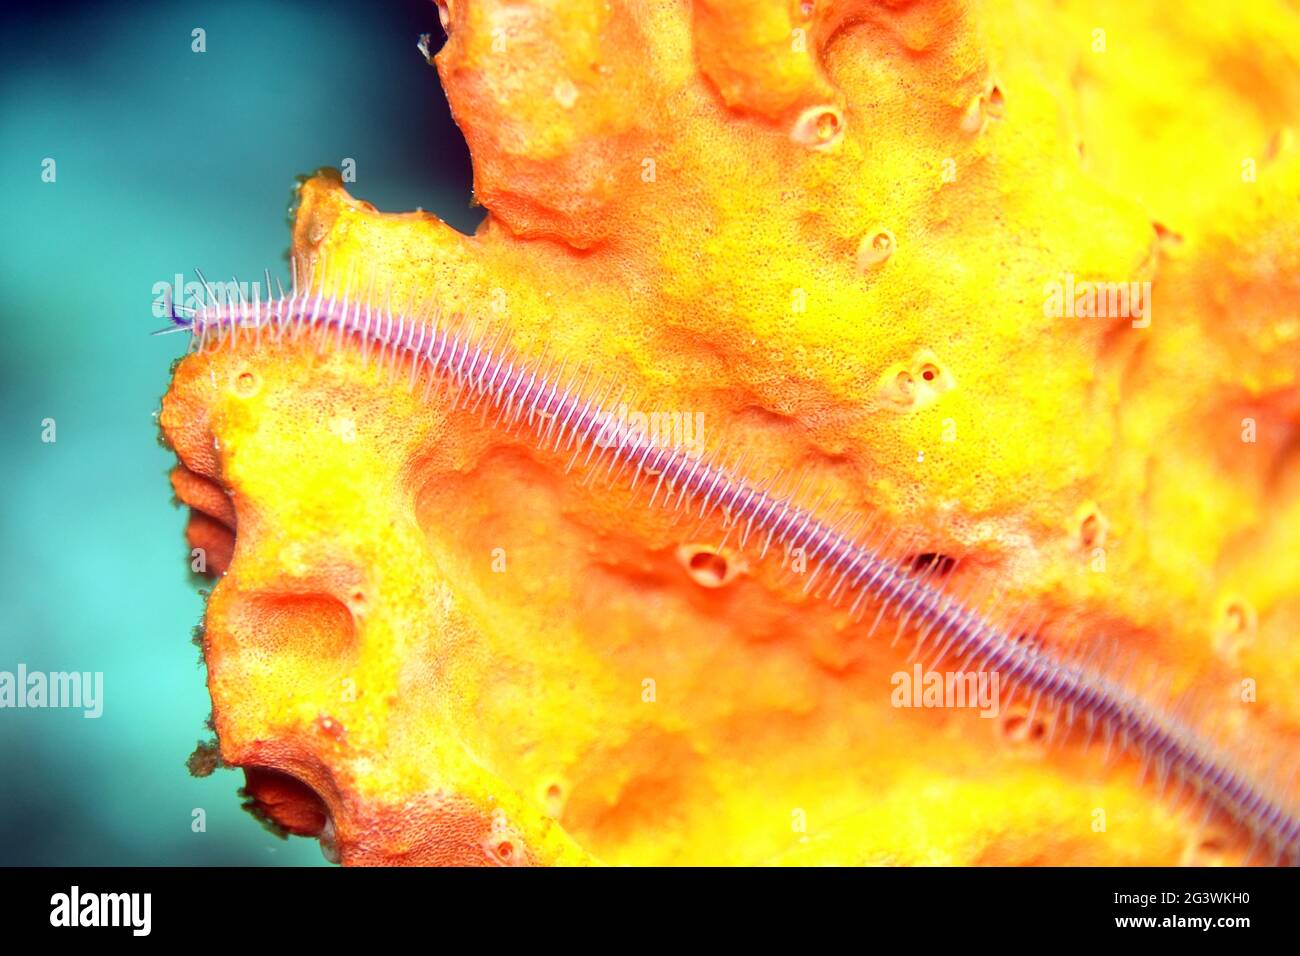 Single arm of a Pink Brittle Star or Violet Brittle Star on an orange sponge Stock Photo